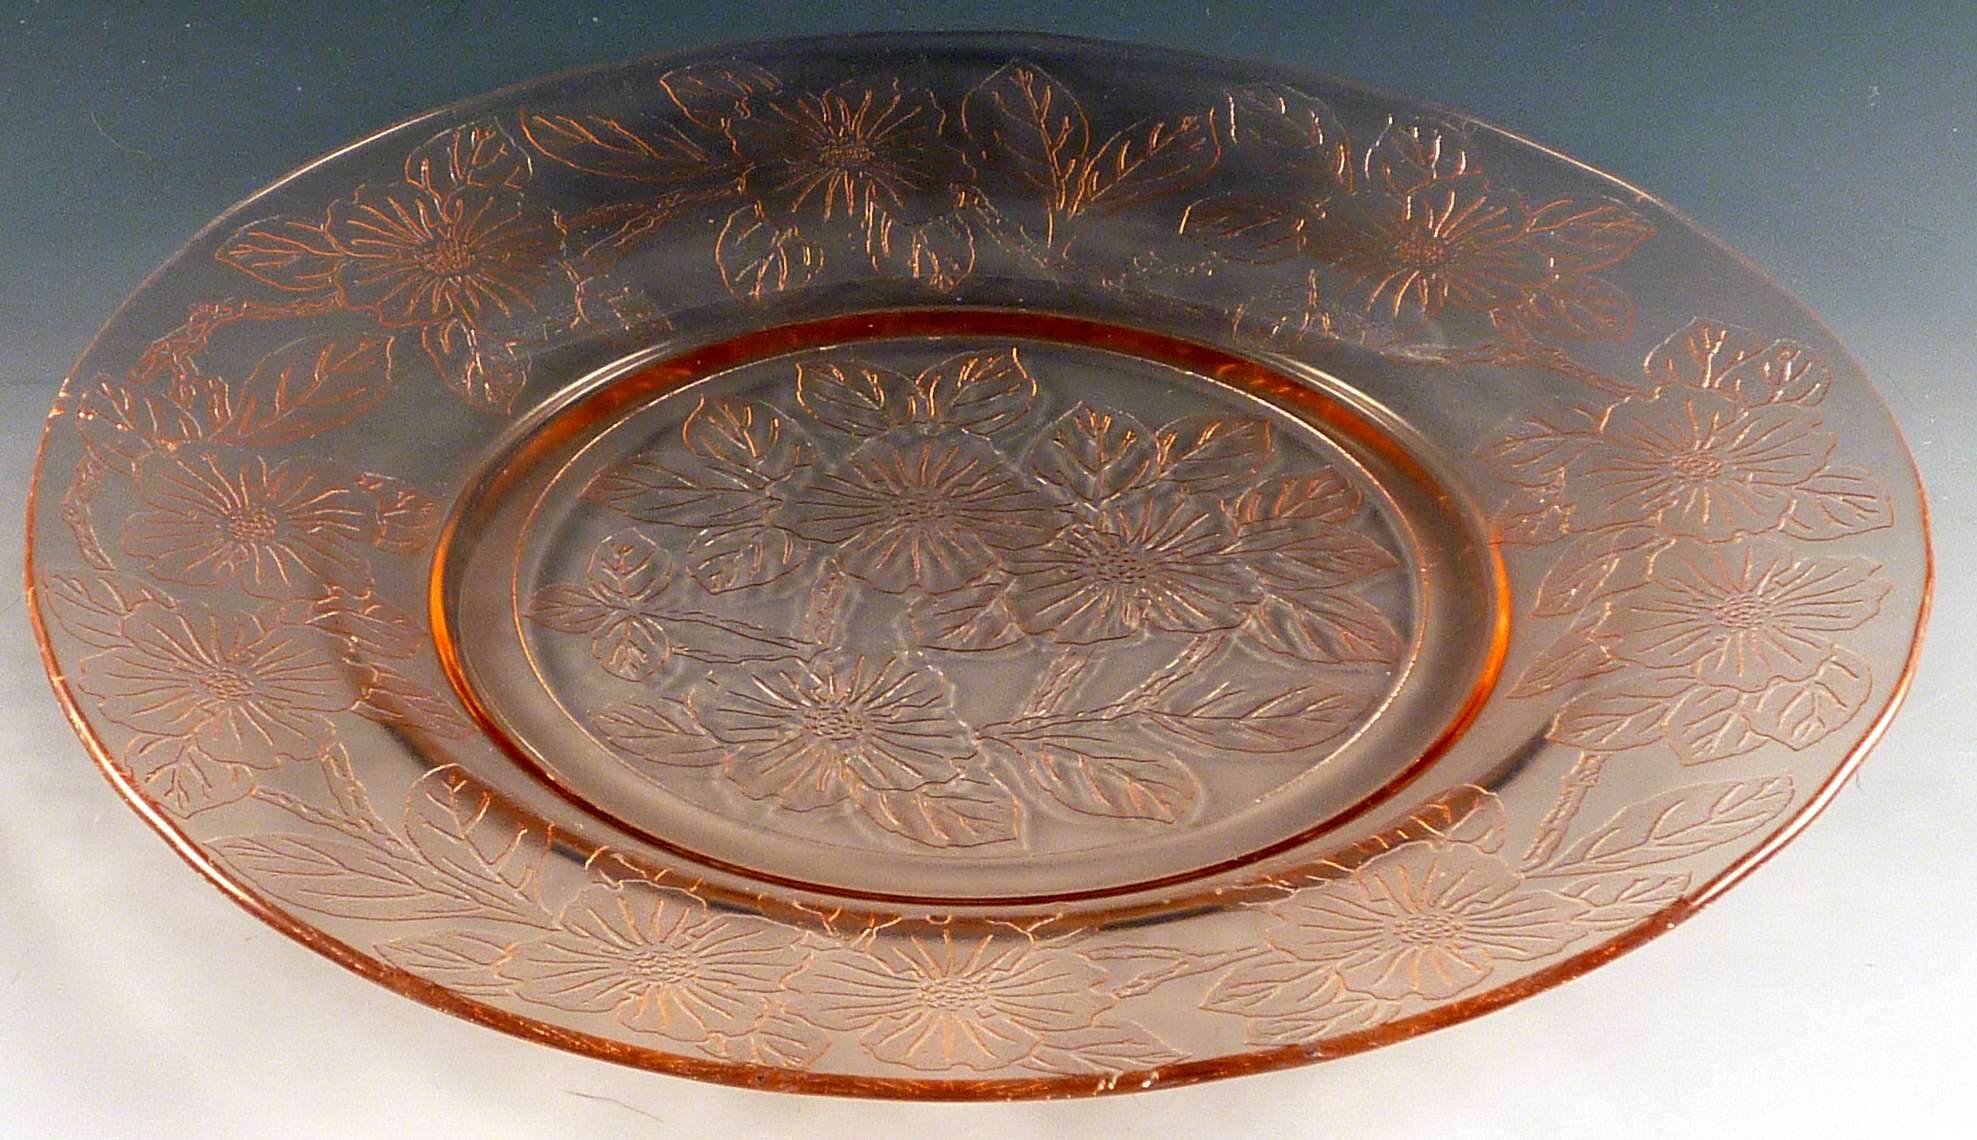 Glass Pick of the Week Dogwood Pink Depression Glass Dinner Plates.